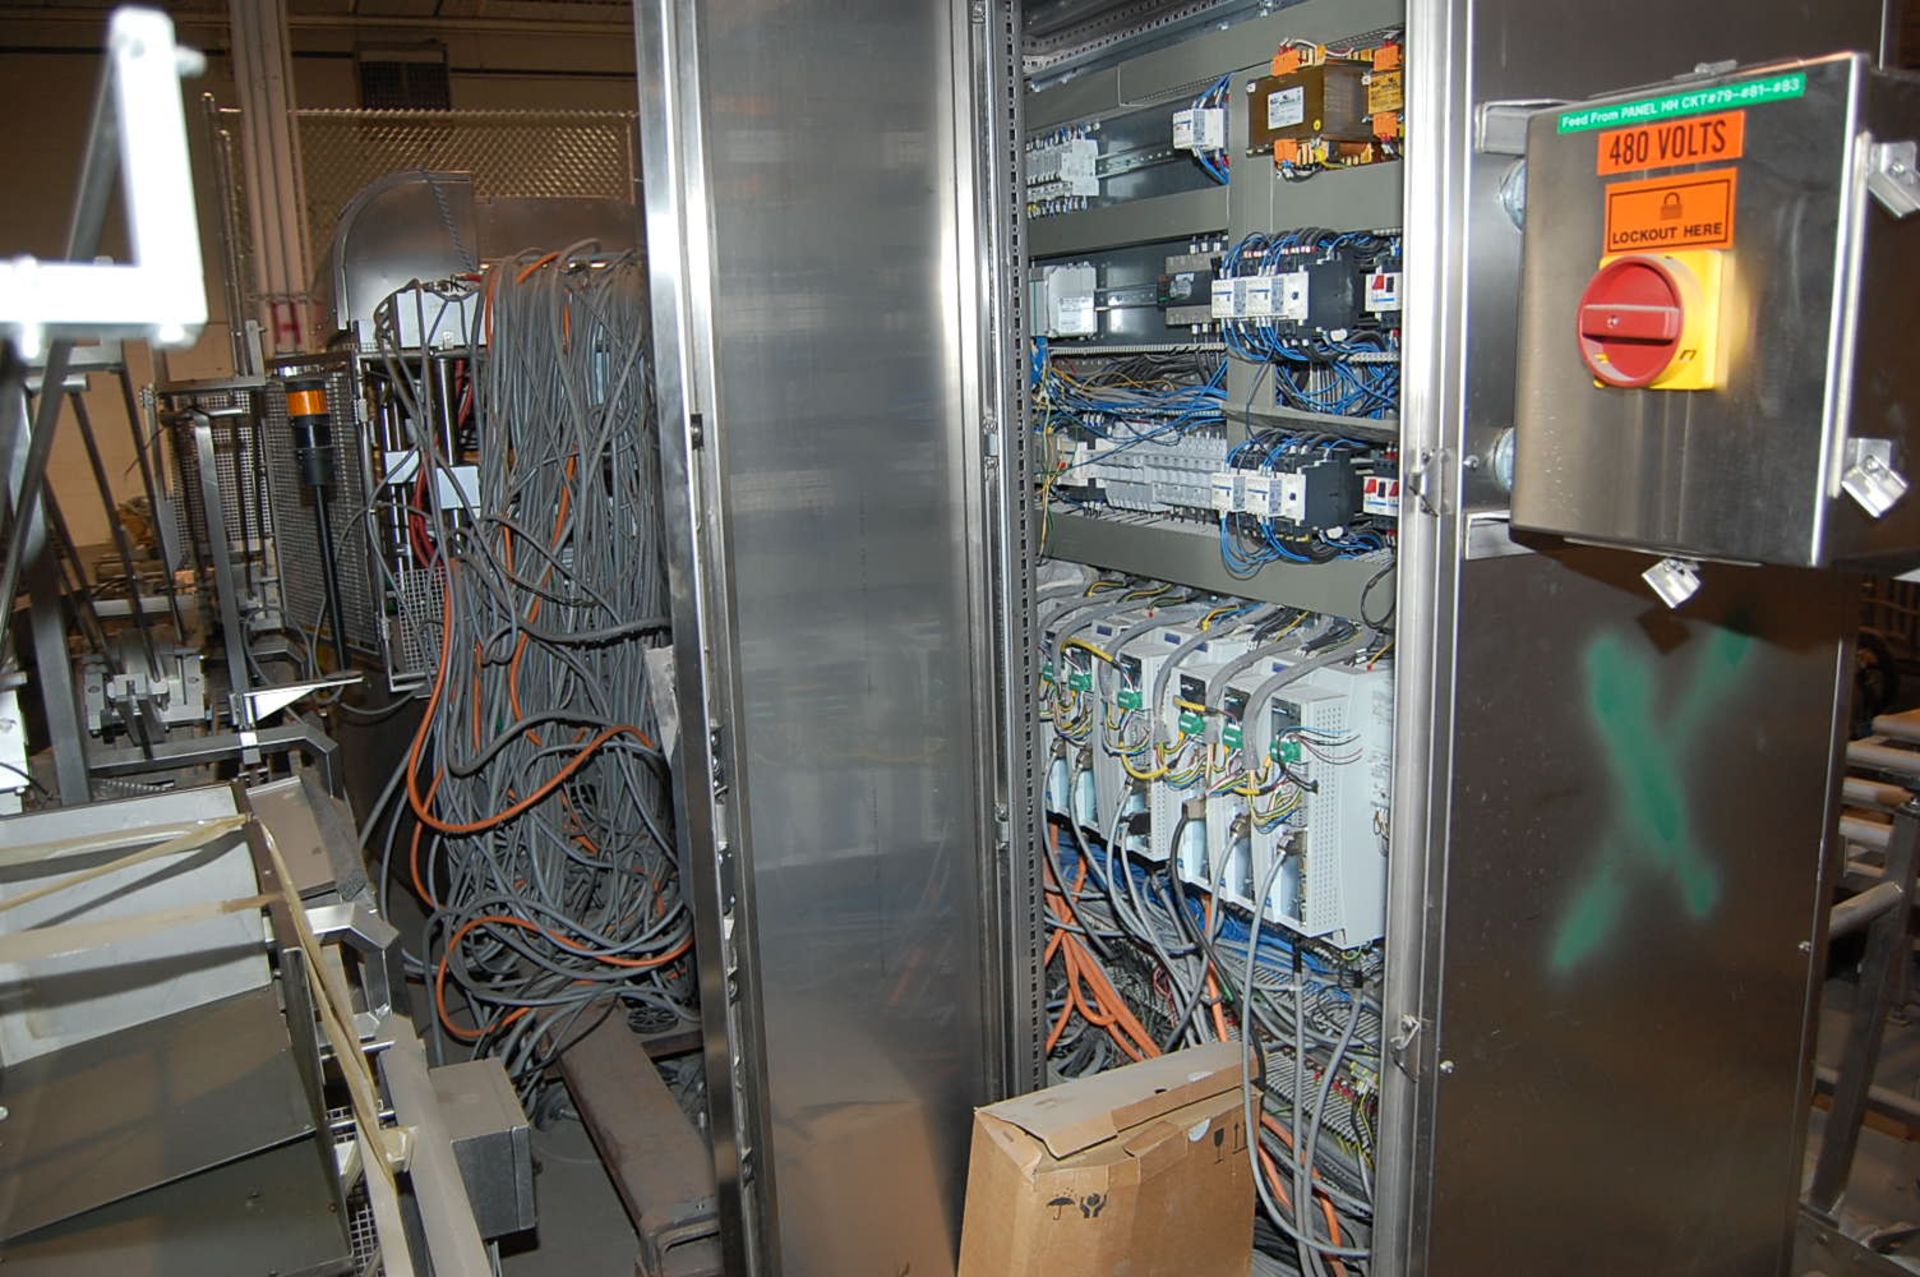 Mondini Heat Seal Packaging Machine, Base, Parts, Components - Only Rigging fee: $1400 - Image 4 of 4